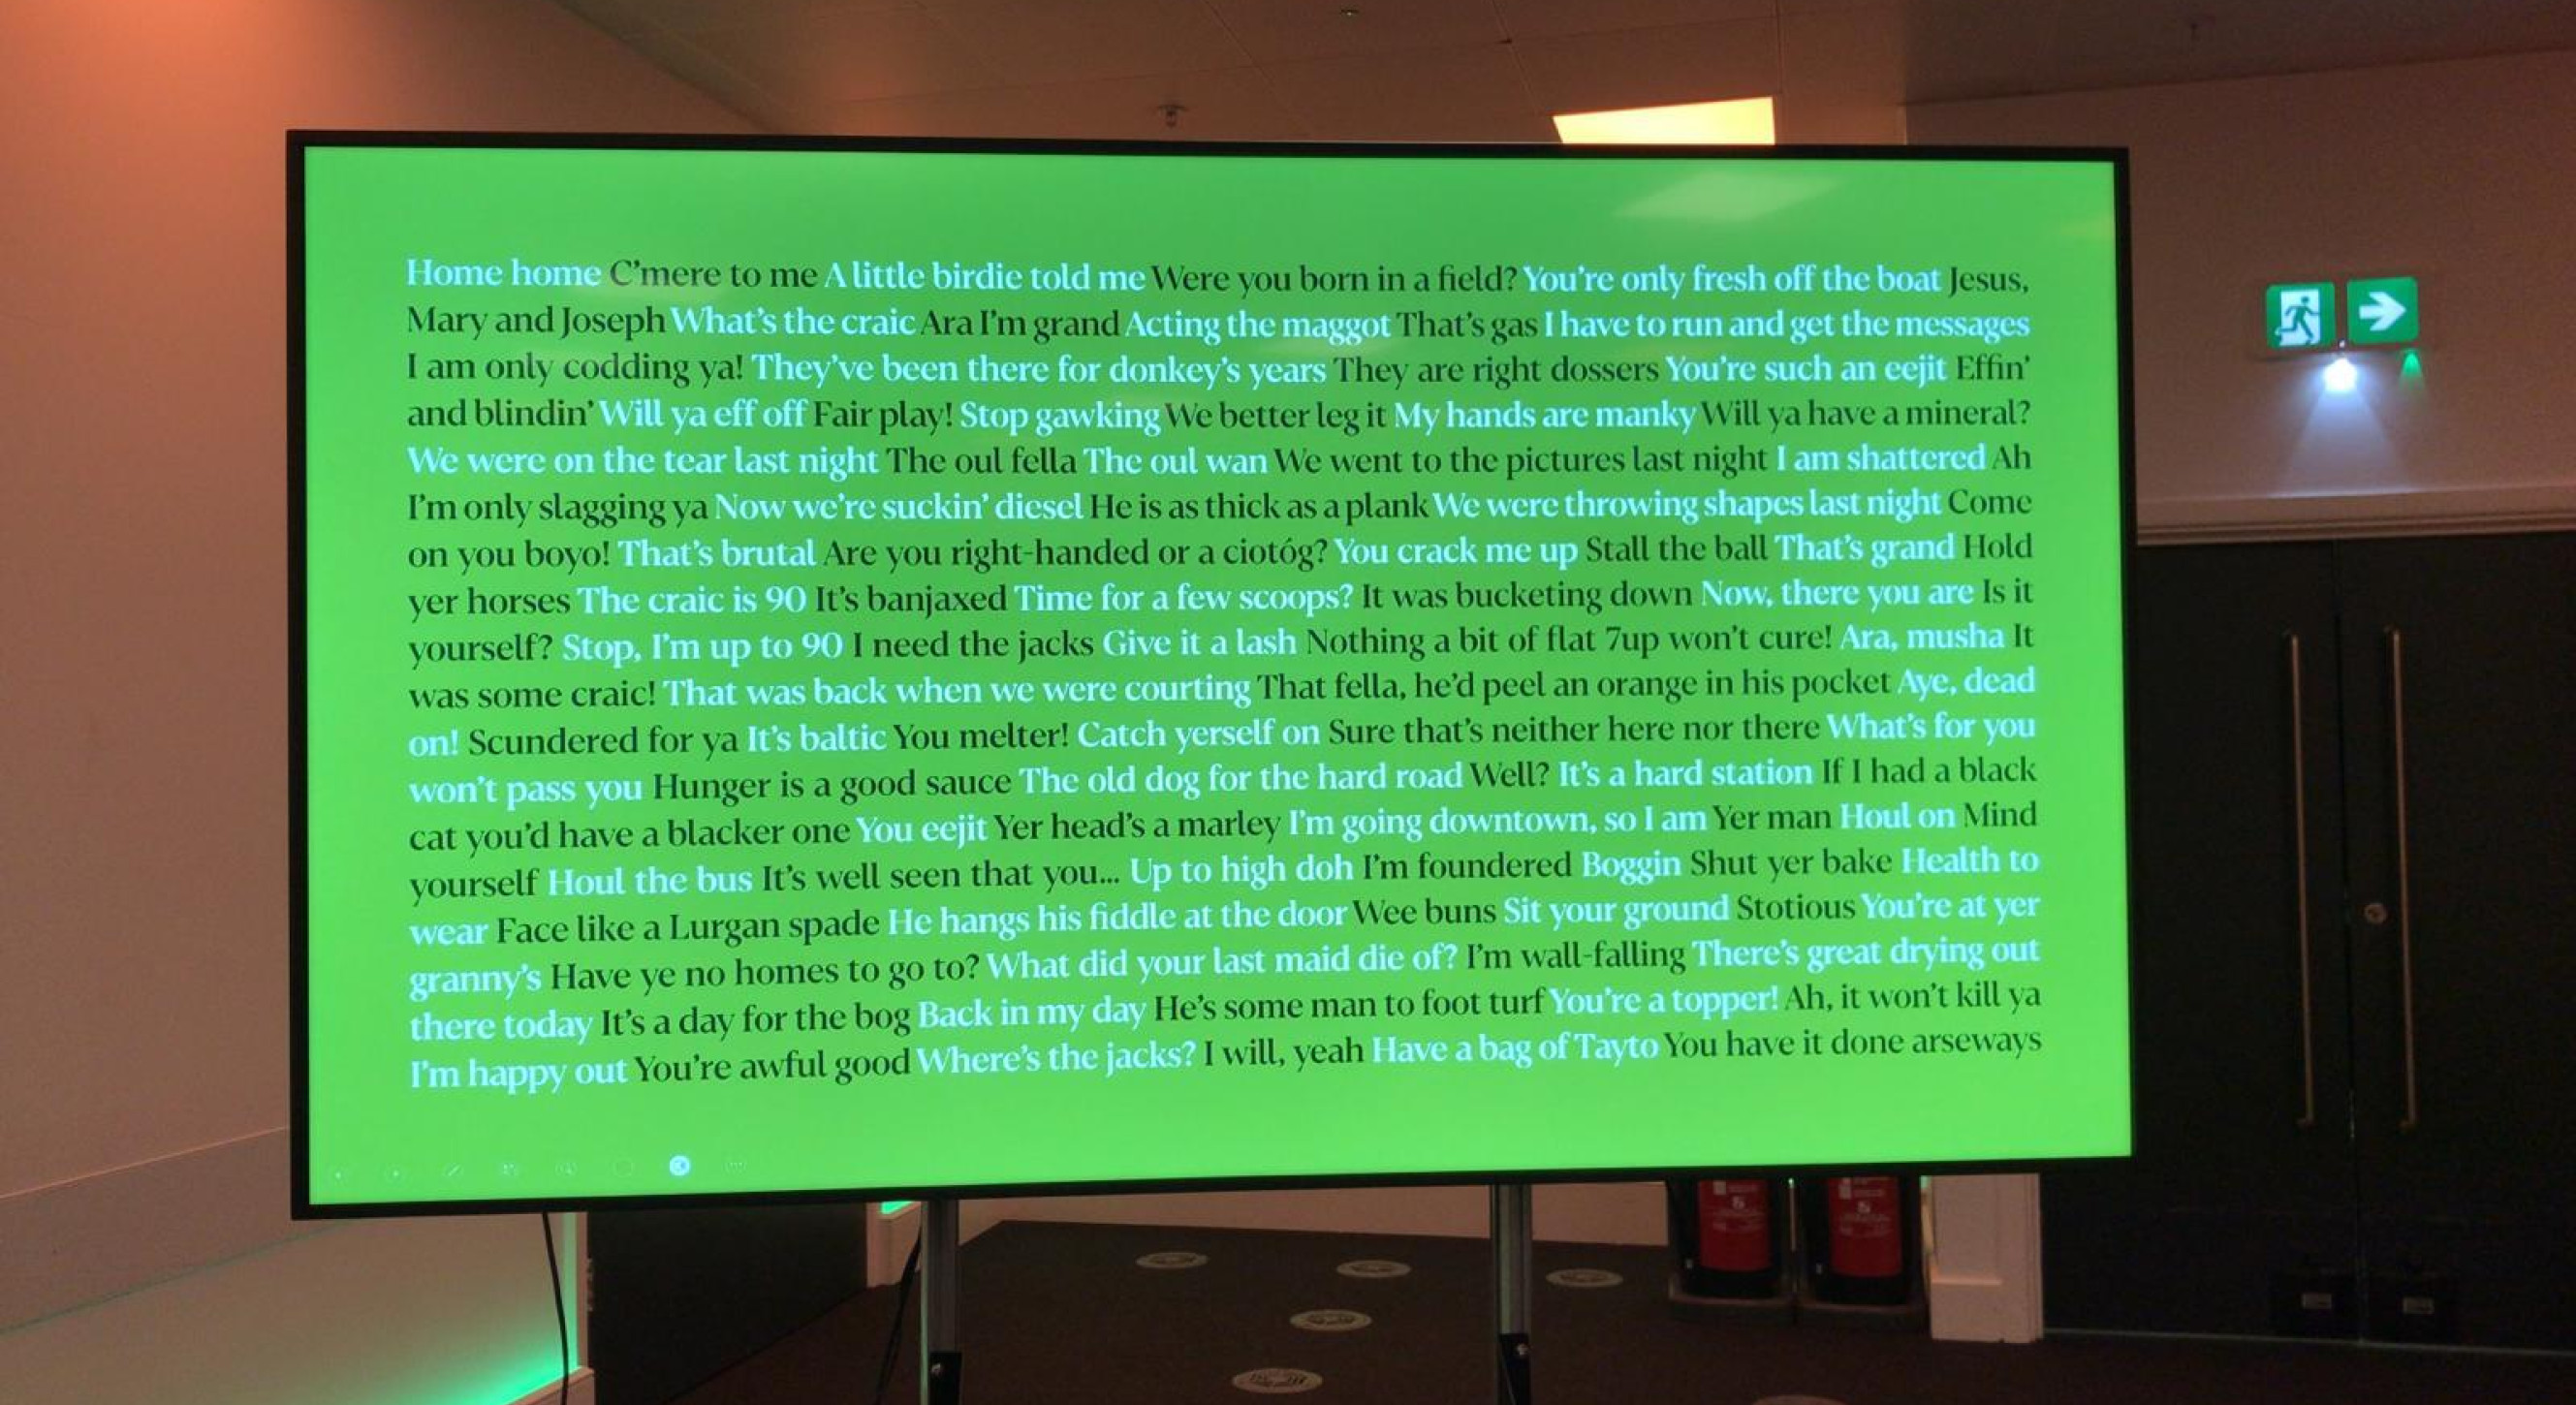 The selection of Irish phrases was a popular exhibit